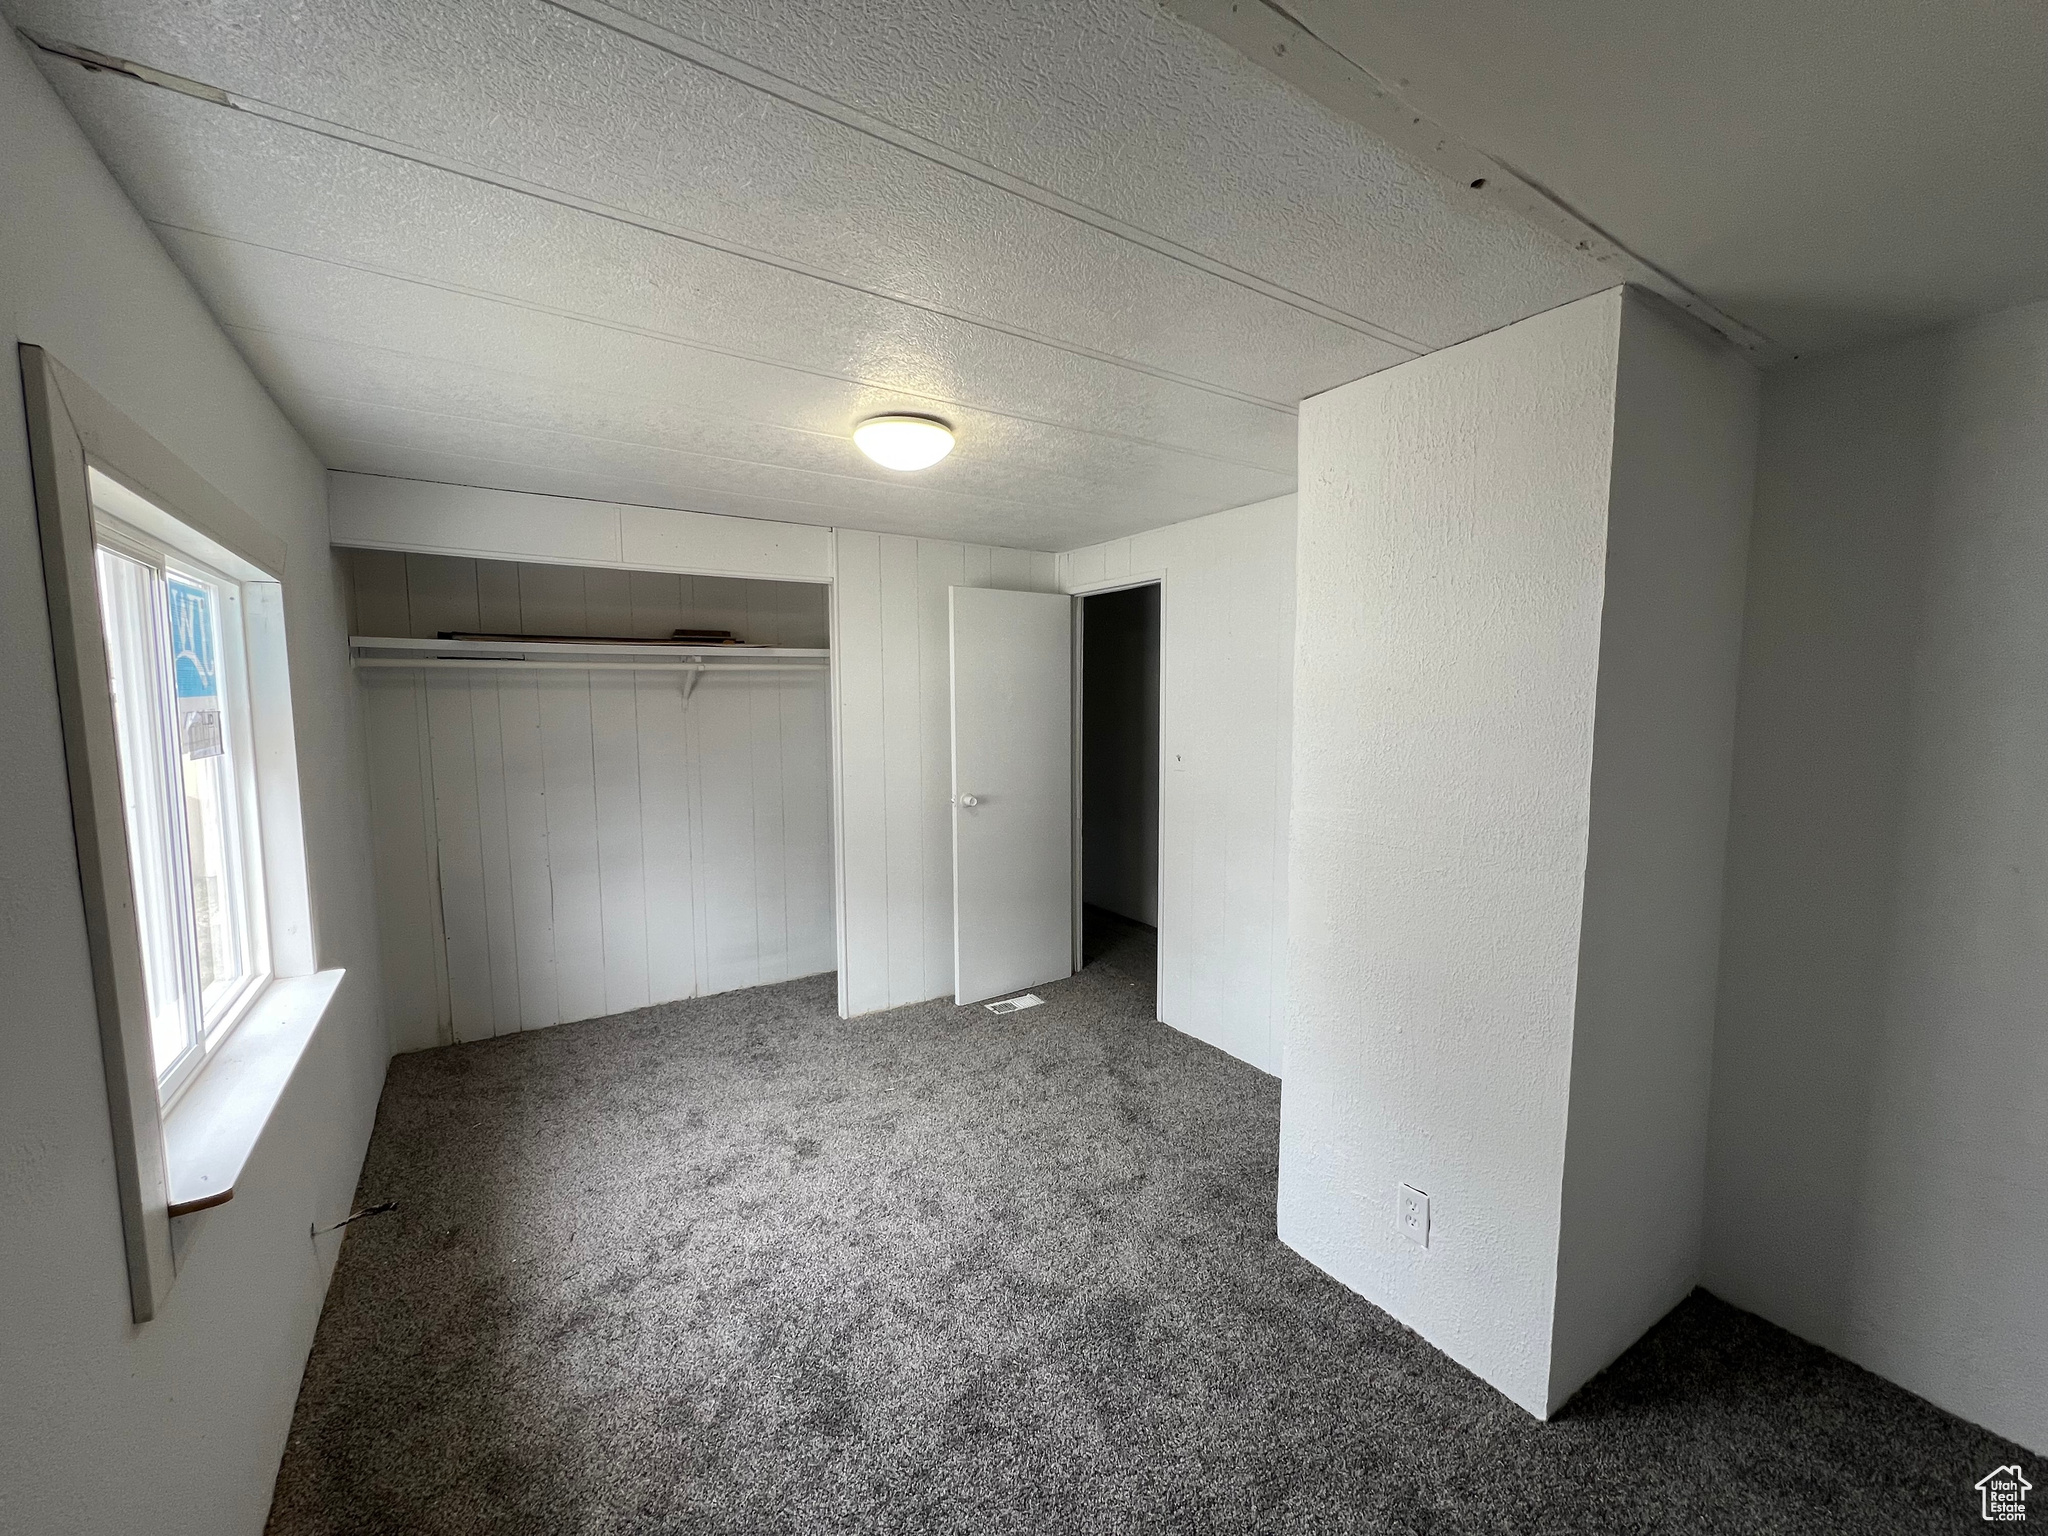 Unfurnished bedroom with a closet, carpet flooring, and a textured ceiling